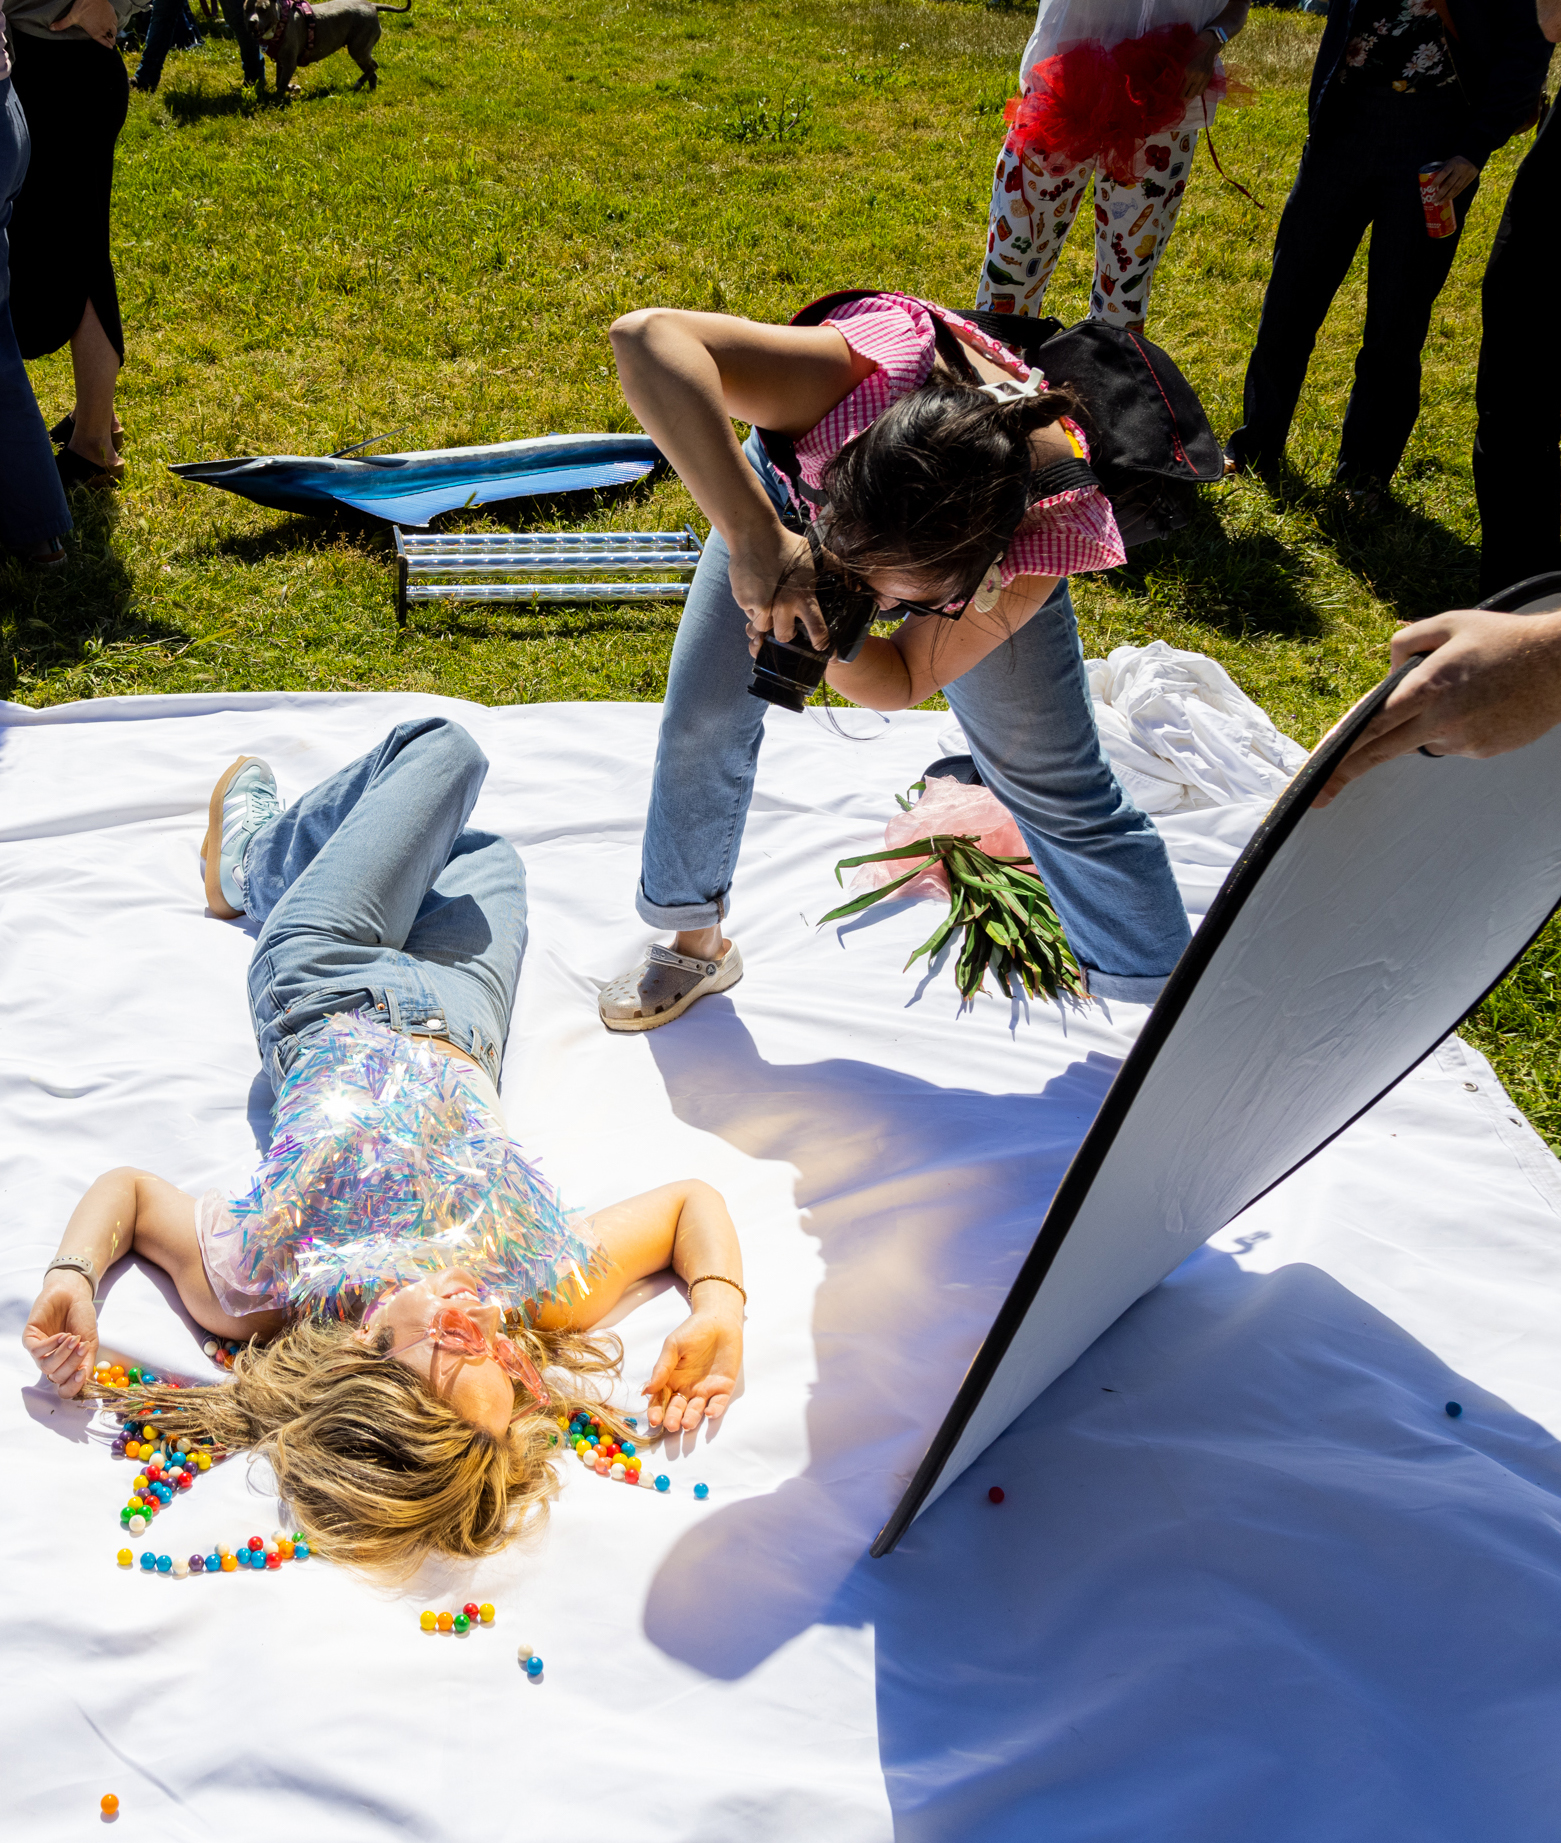 A woman photographs another lying on a white sheet covered in colorful round balls outdoors, with bystanders standing around and a photographer's reflector tilted toward the subject.